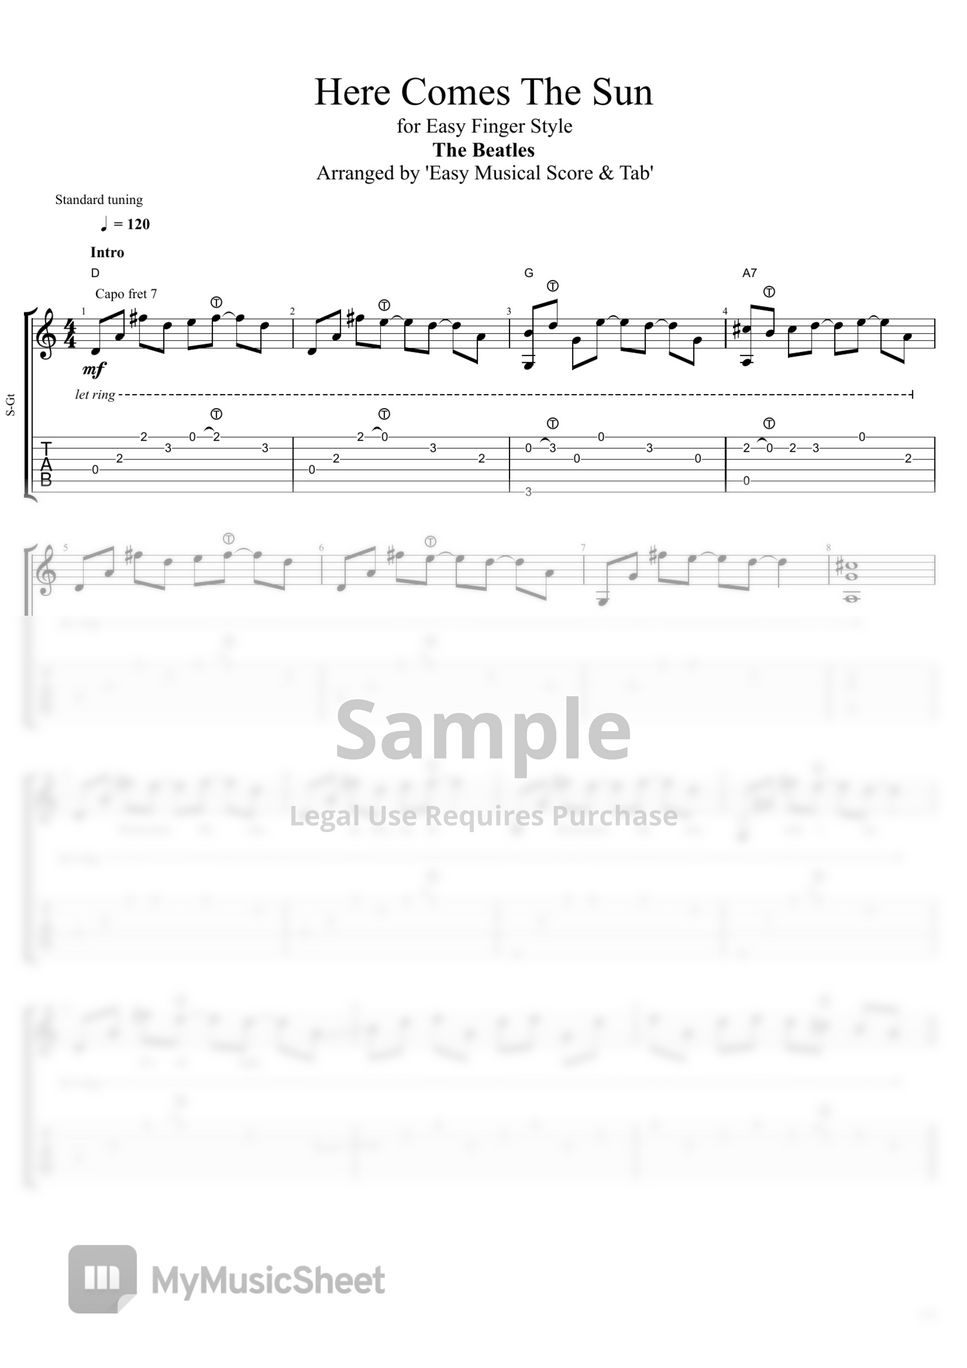 The Beatles - Here Comes The Sun (Tab for easy Finger Style) by Easy Musical Score & Tab